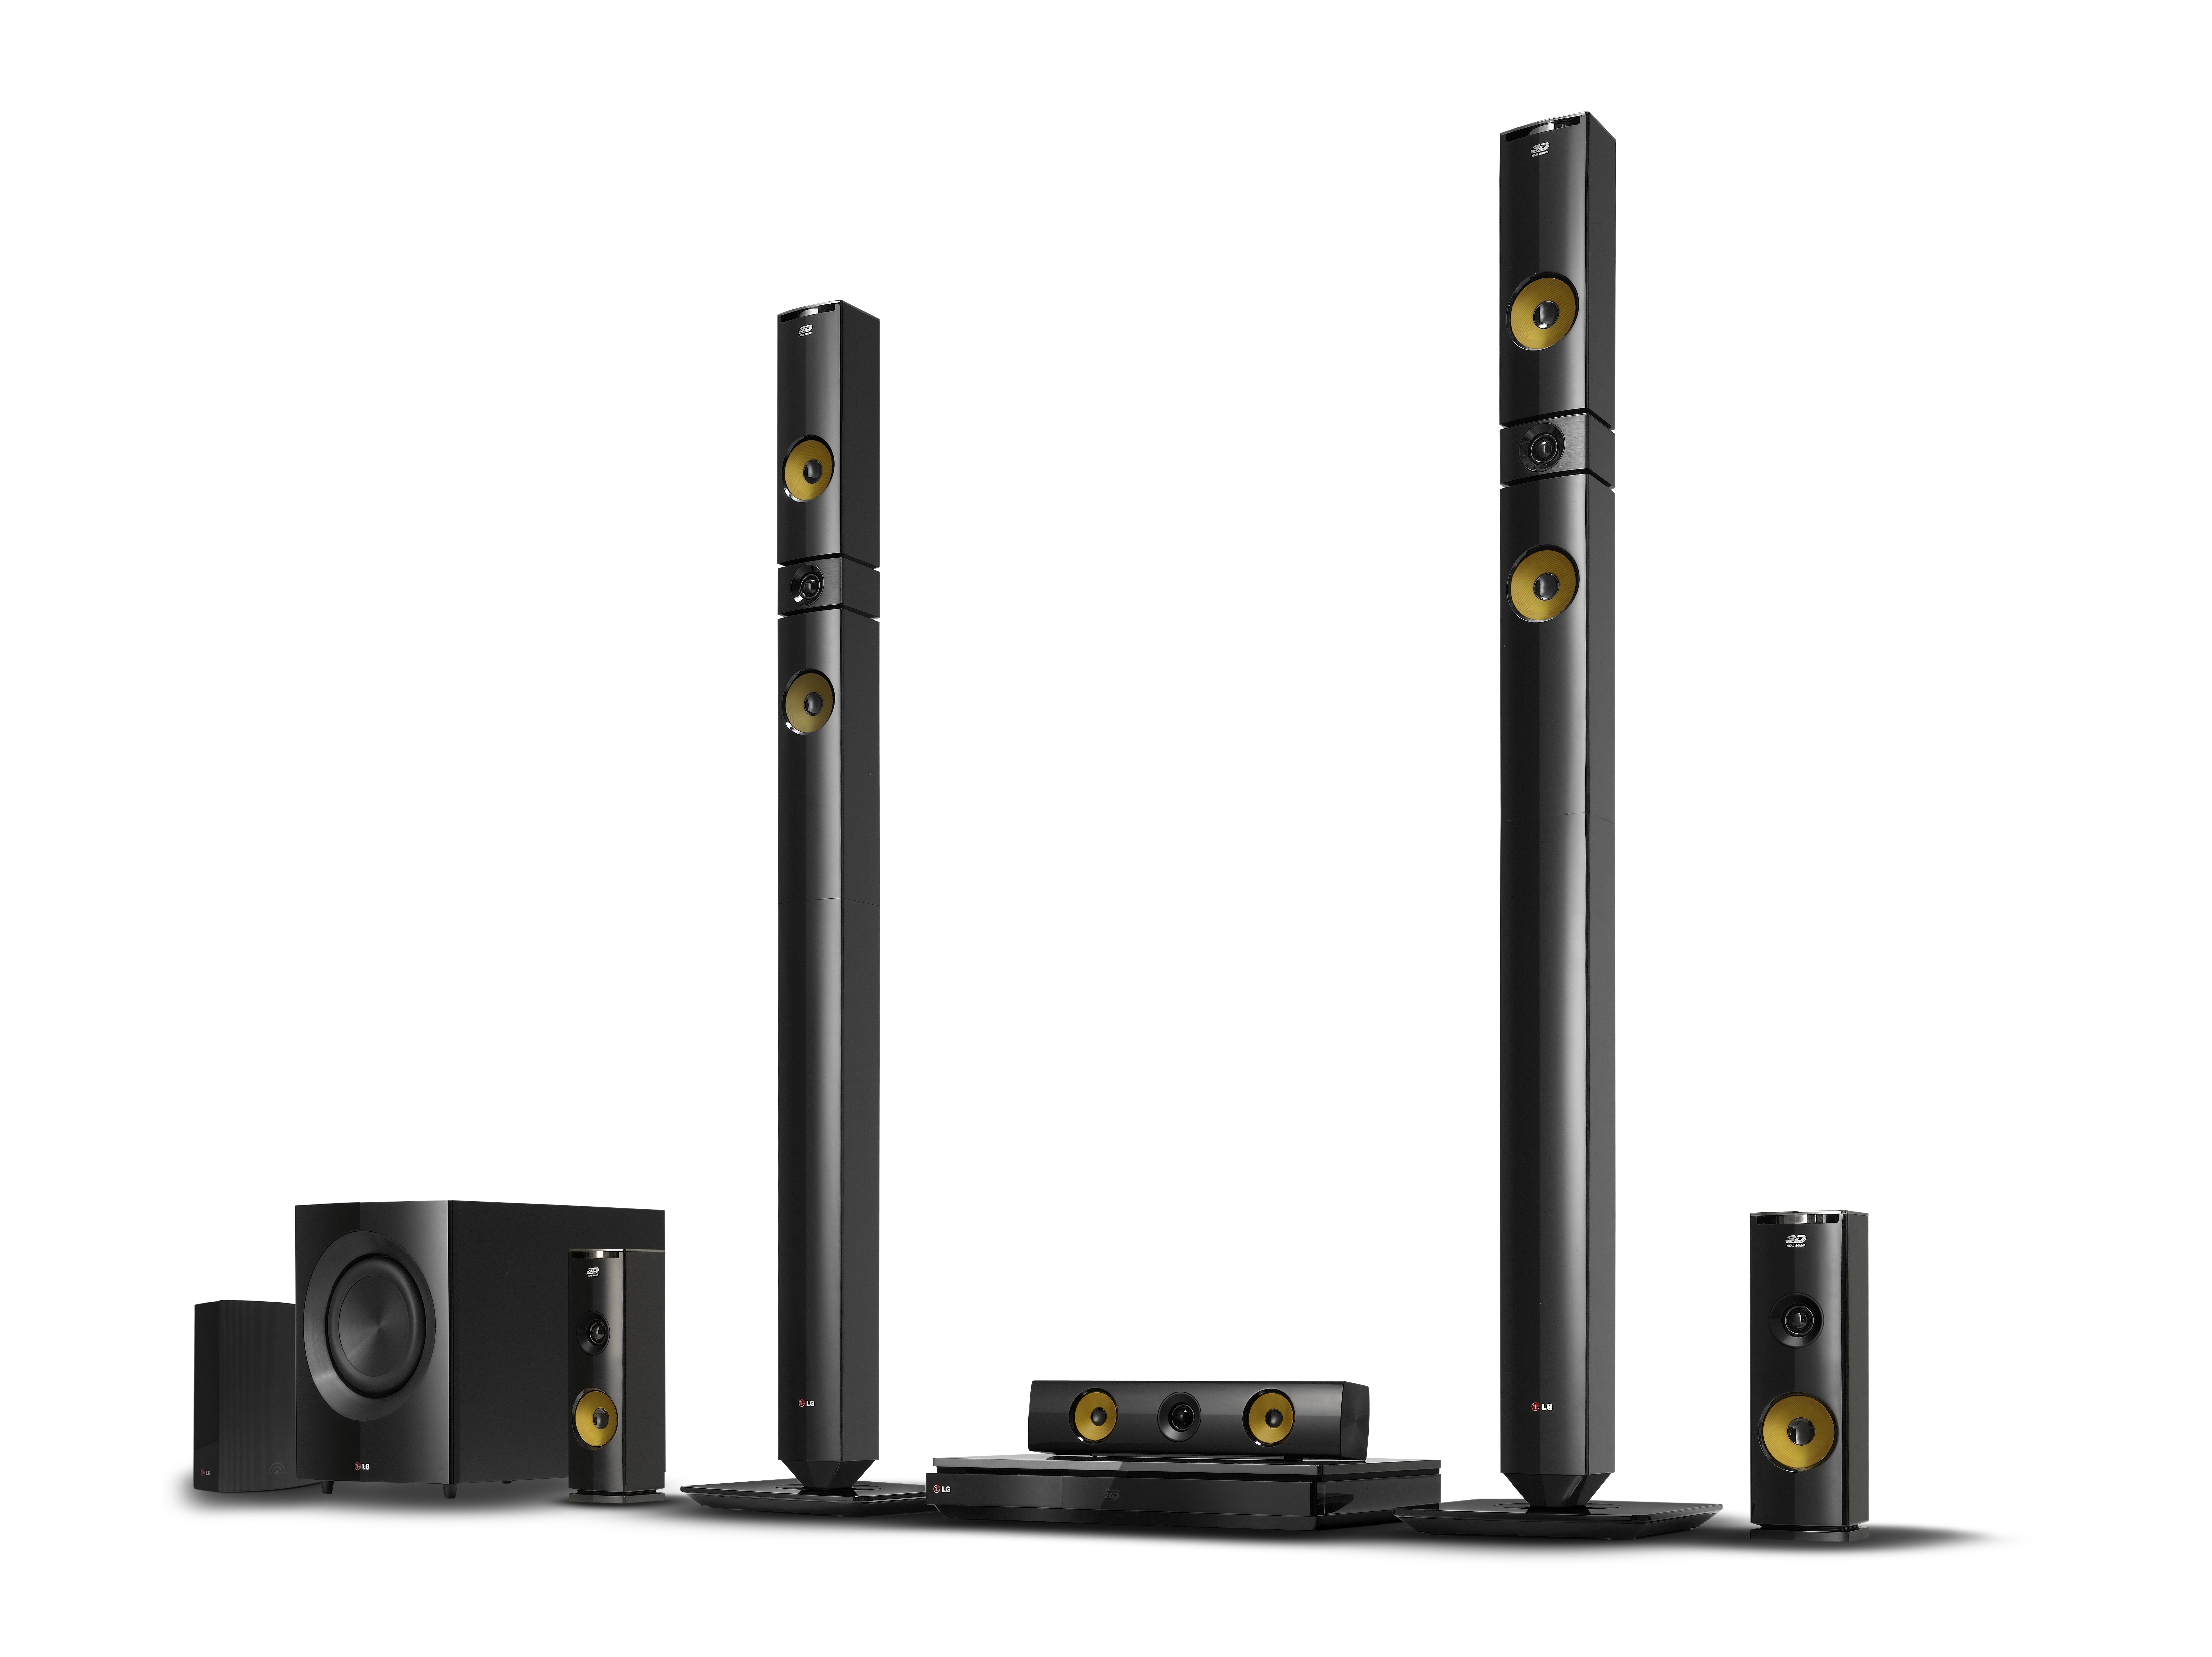 LG 2013 audio and video lineup including BH9430PW 9.1-channel speaker system, NB4530A Sound Bar, BP730 Blu-ray player with Smart TV features, the ND8630 Dual Docking Speaker and the NP6630 Portable Speaker.